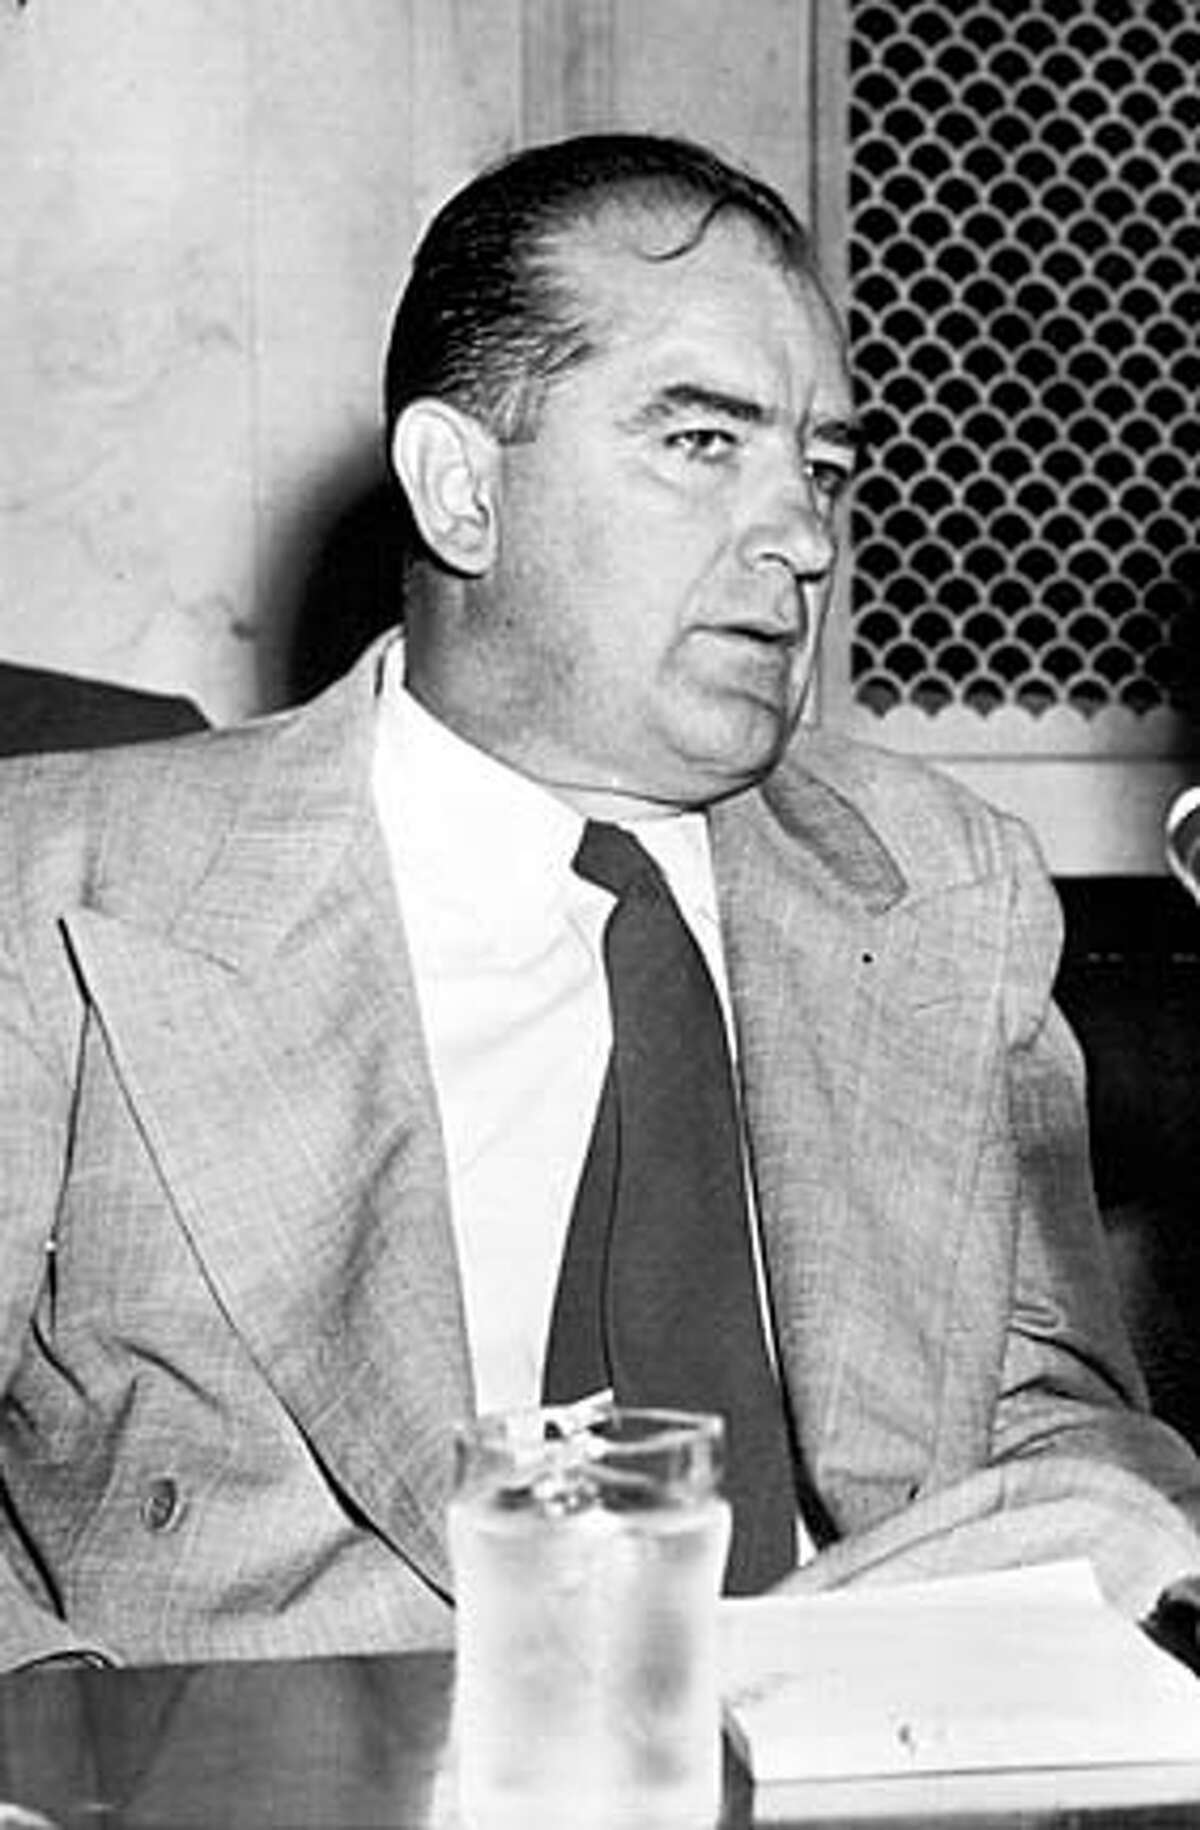 hoover-dismayed-by-mccarthy-s-methods-as-serious-an-anti-communist-as-fbi-director-was-he